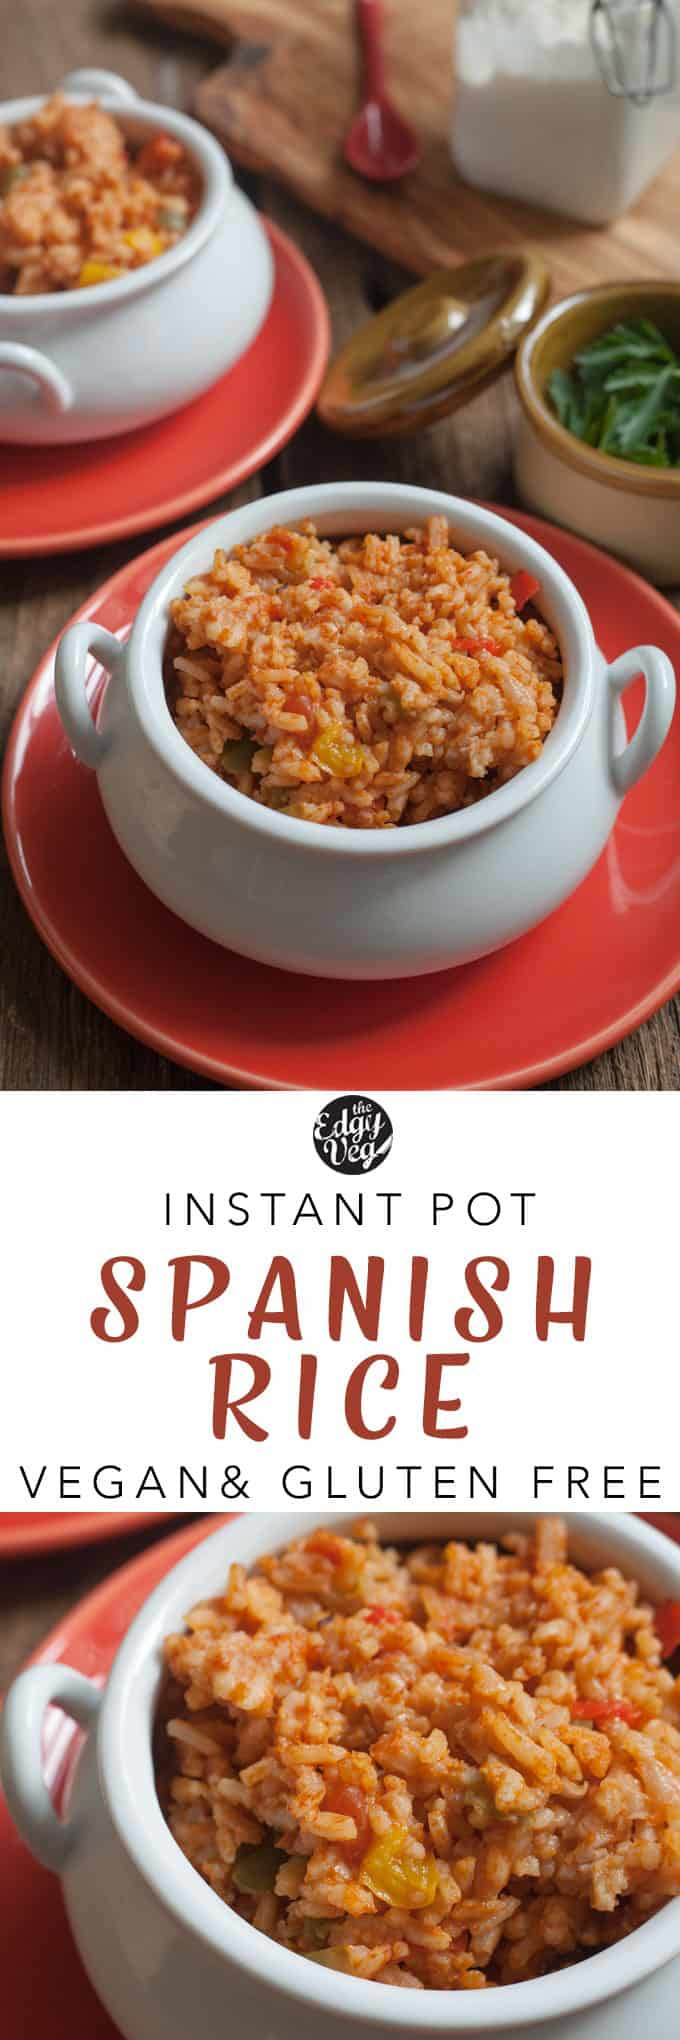 Spanish Rice In Instant Pot
 Spanish Rice in an Instant Pot